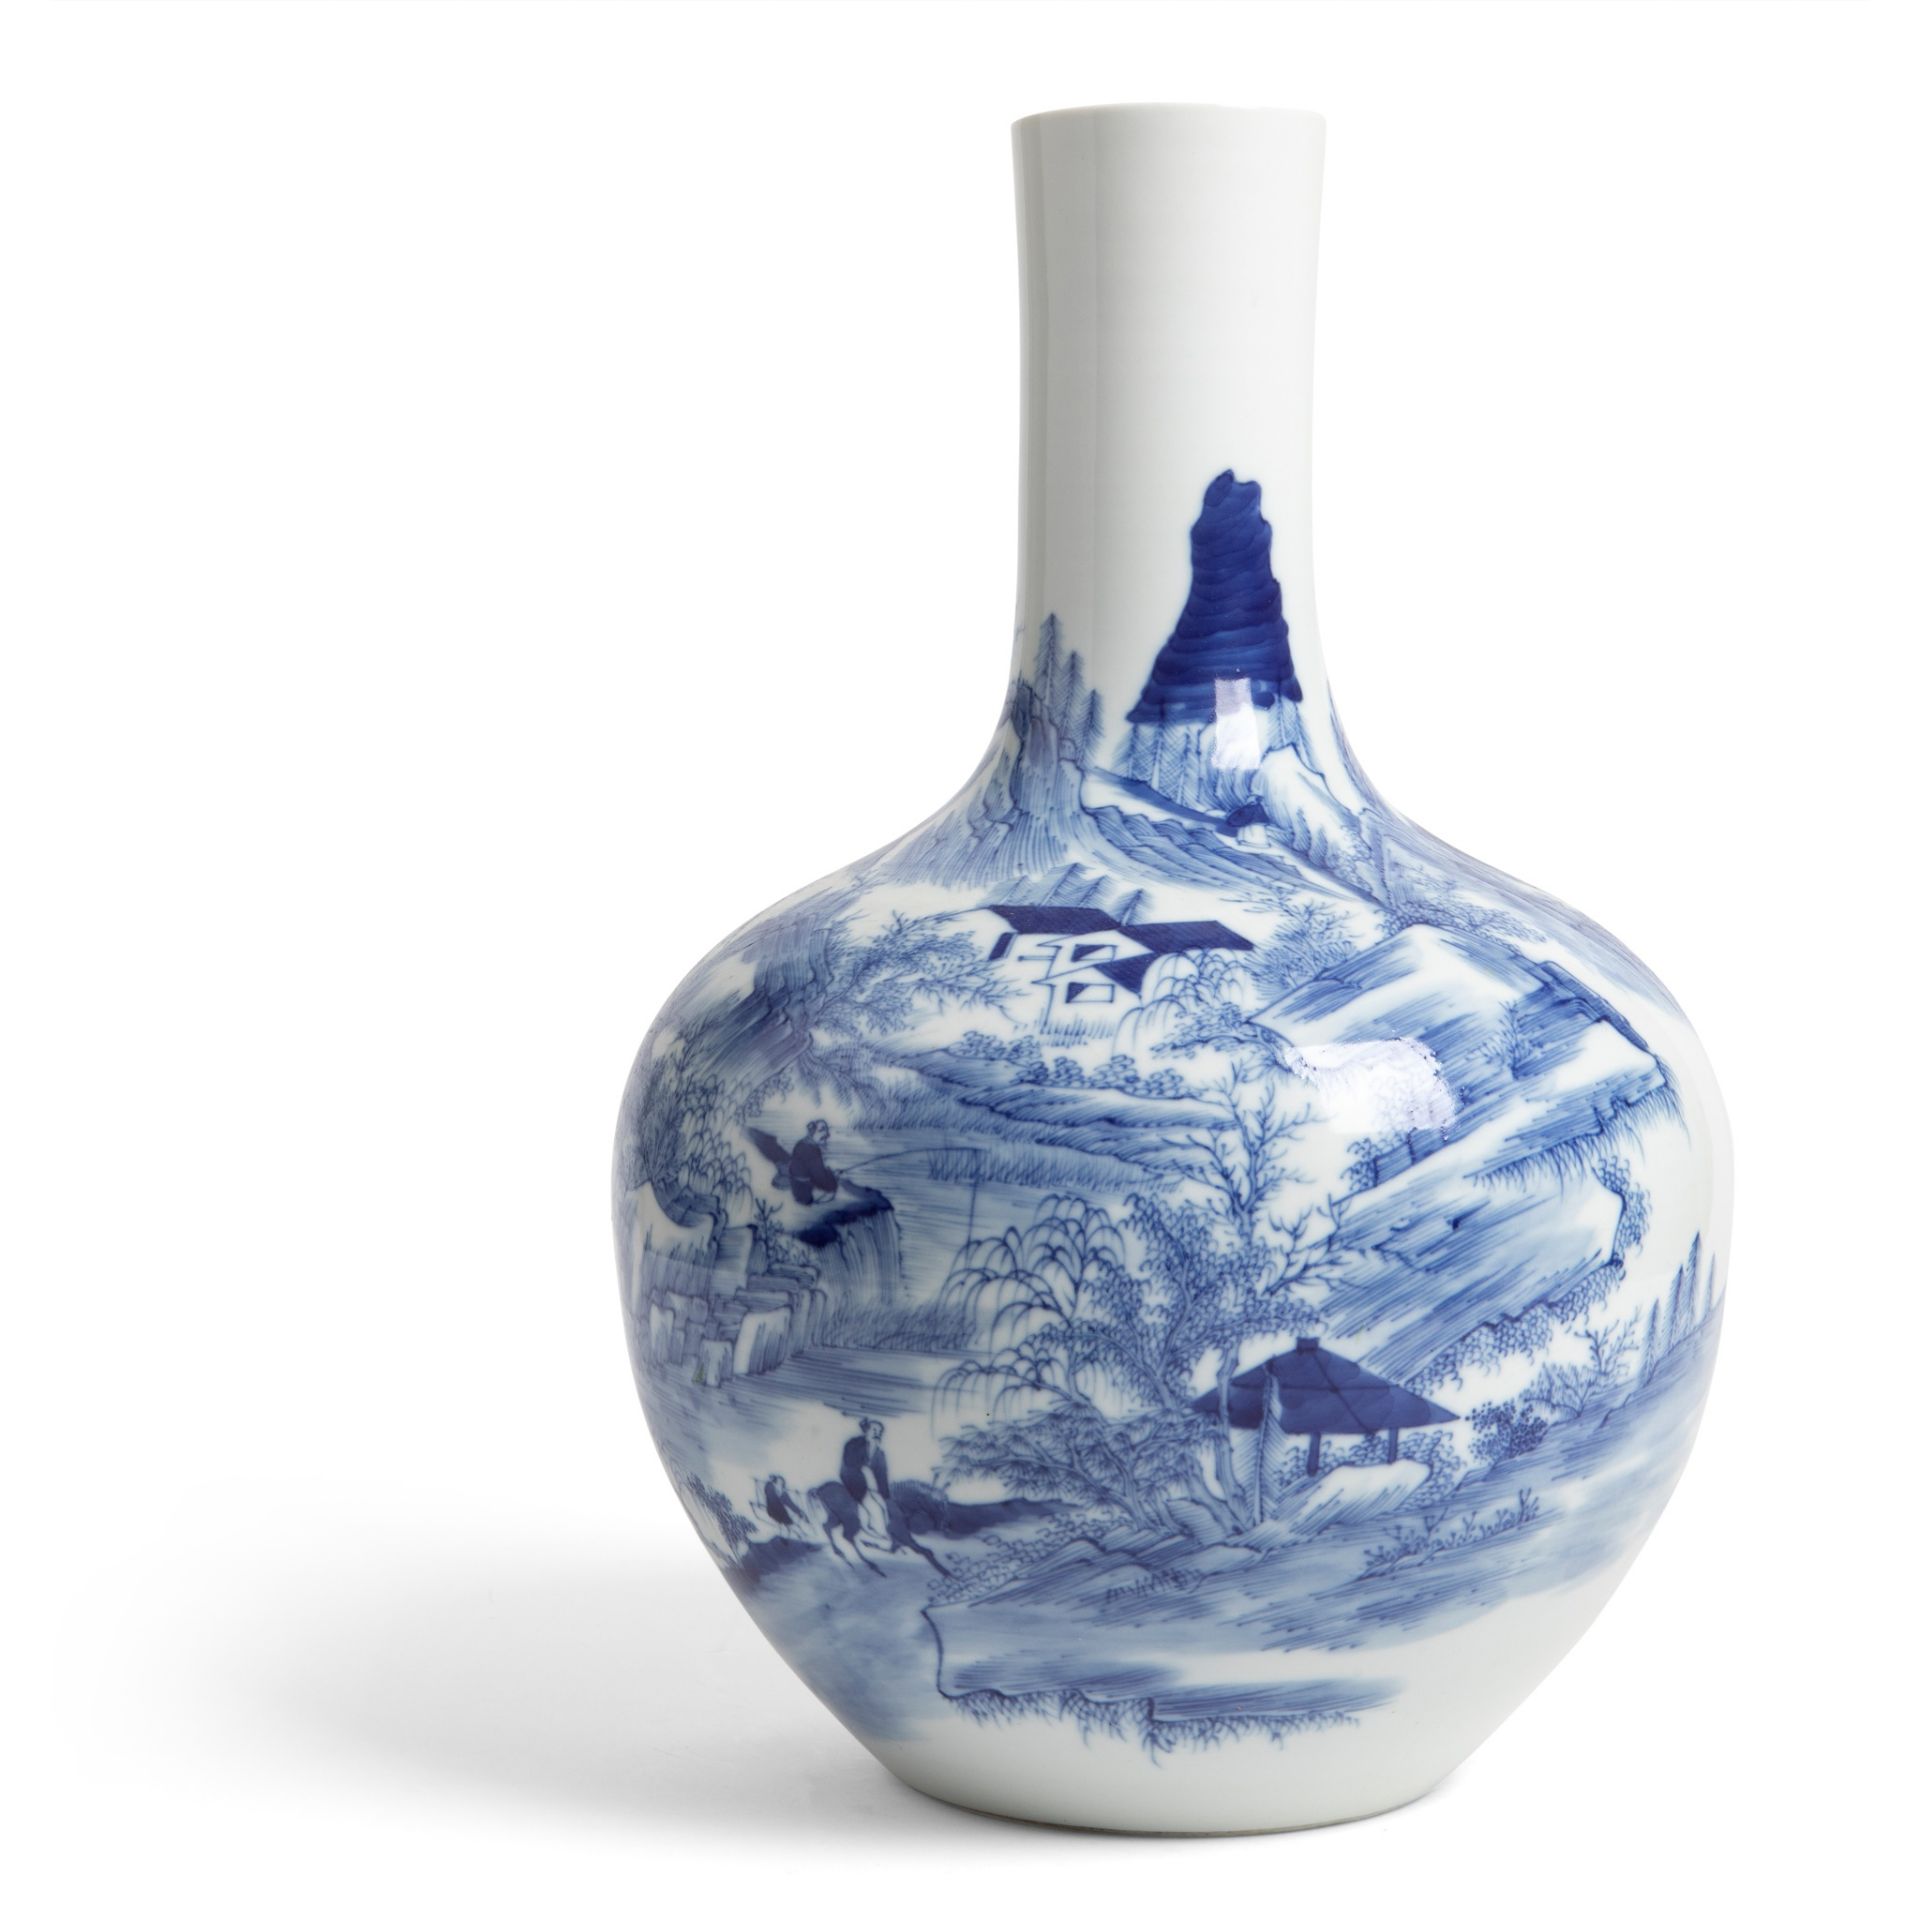 BLUE AND WHITE BOTTLE VASE 19TH-20TH CENTURY